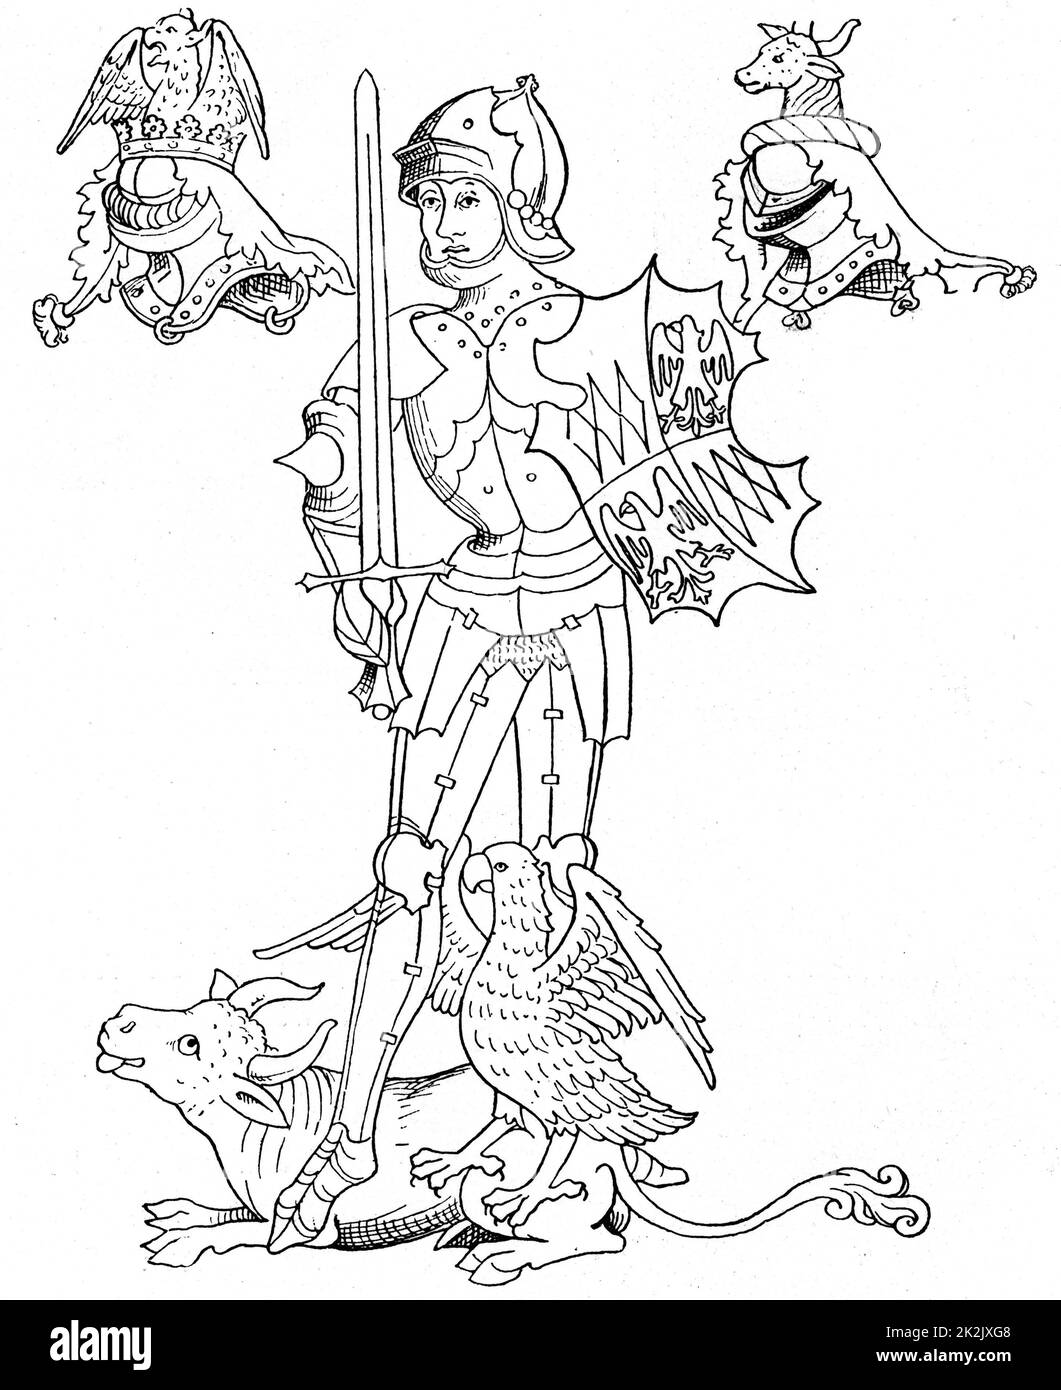 Warwick the Kingmaker: Richard Neville, Earl of Warwick (1428-1471). English soldier and statesman. Killed at the Battle of Barnet during Wars of the Roses. Warwick in armour holding shield and sword. After Rous's Roll of the Earls of Warwick. Stock Photo